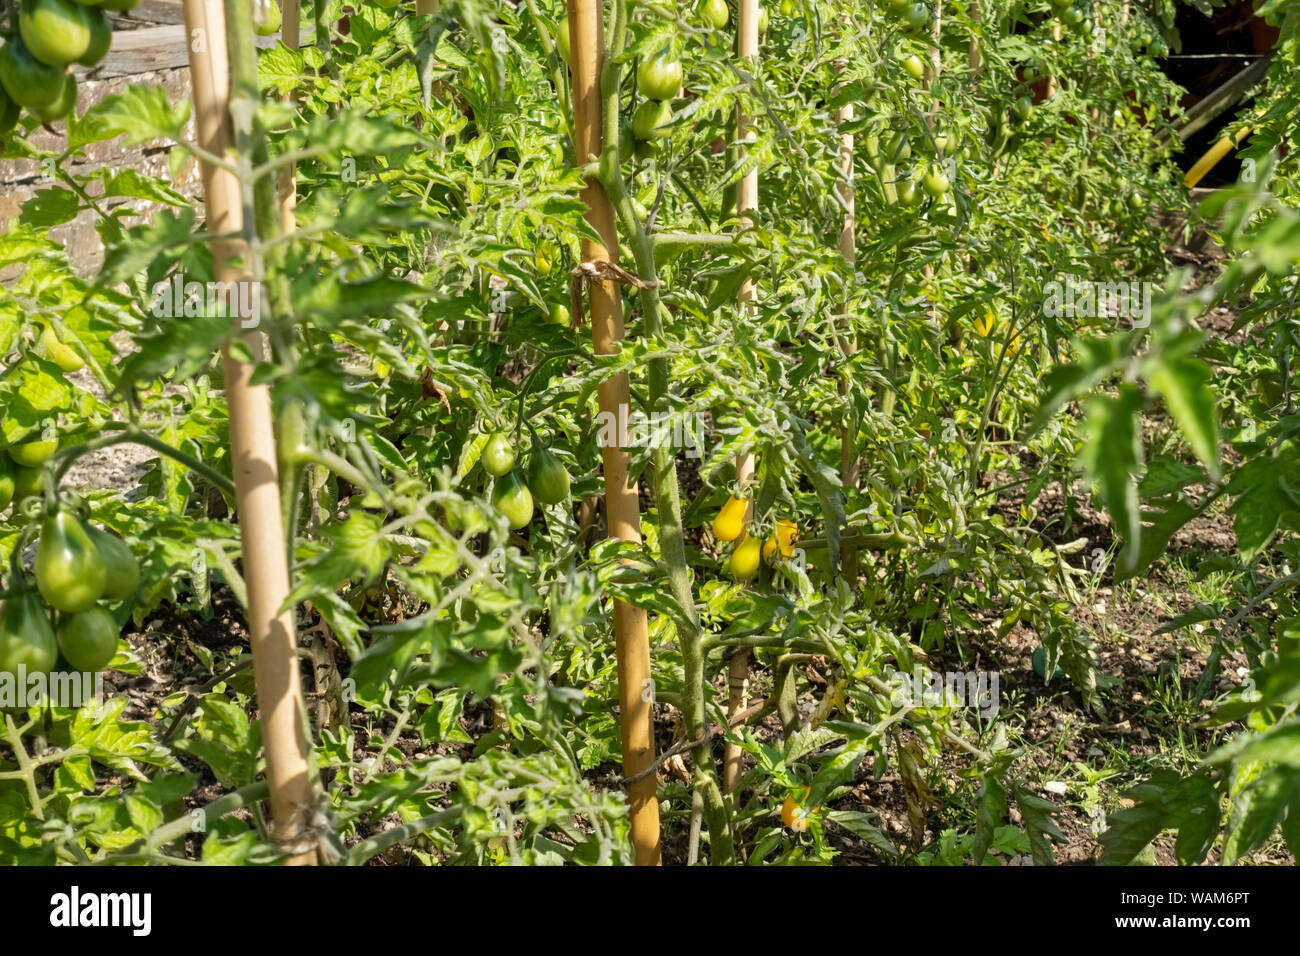 Rows of yellow pear tomato plants tomatoes plant growing outside on a vegetable plot garden in summer England UK United Kingdom GB Great Britain Stock Photo